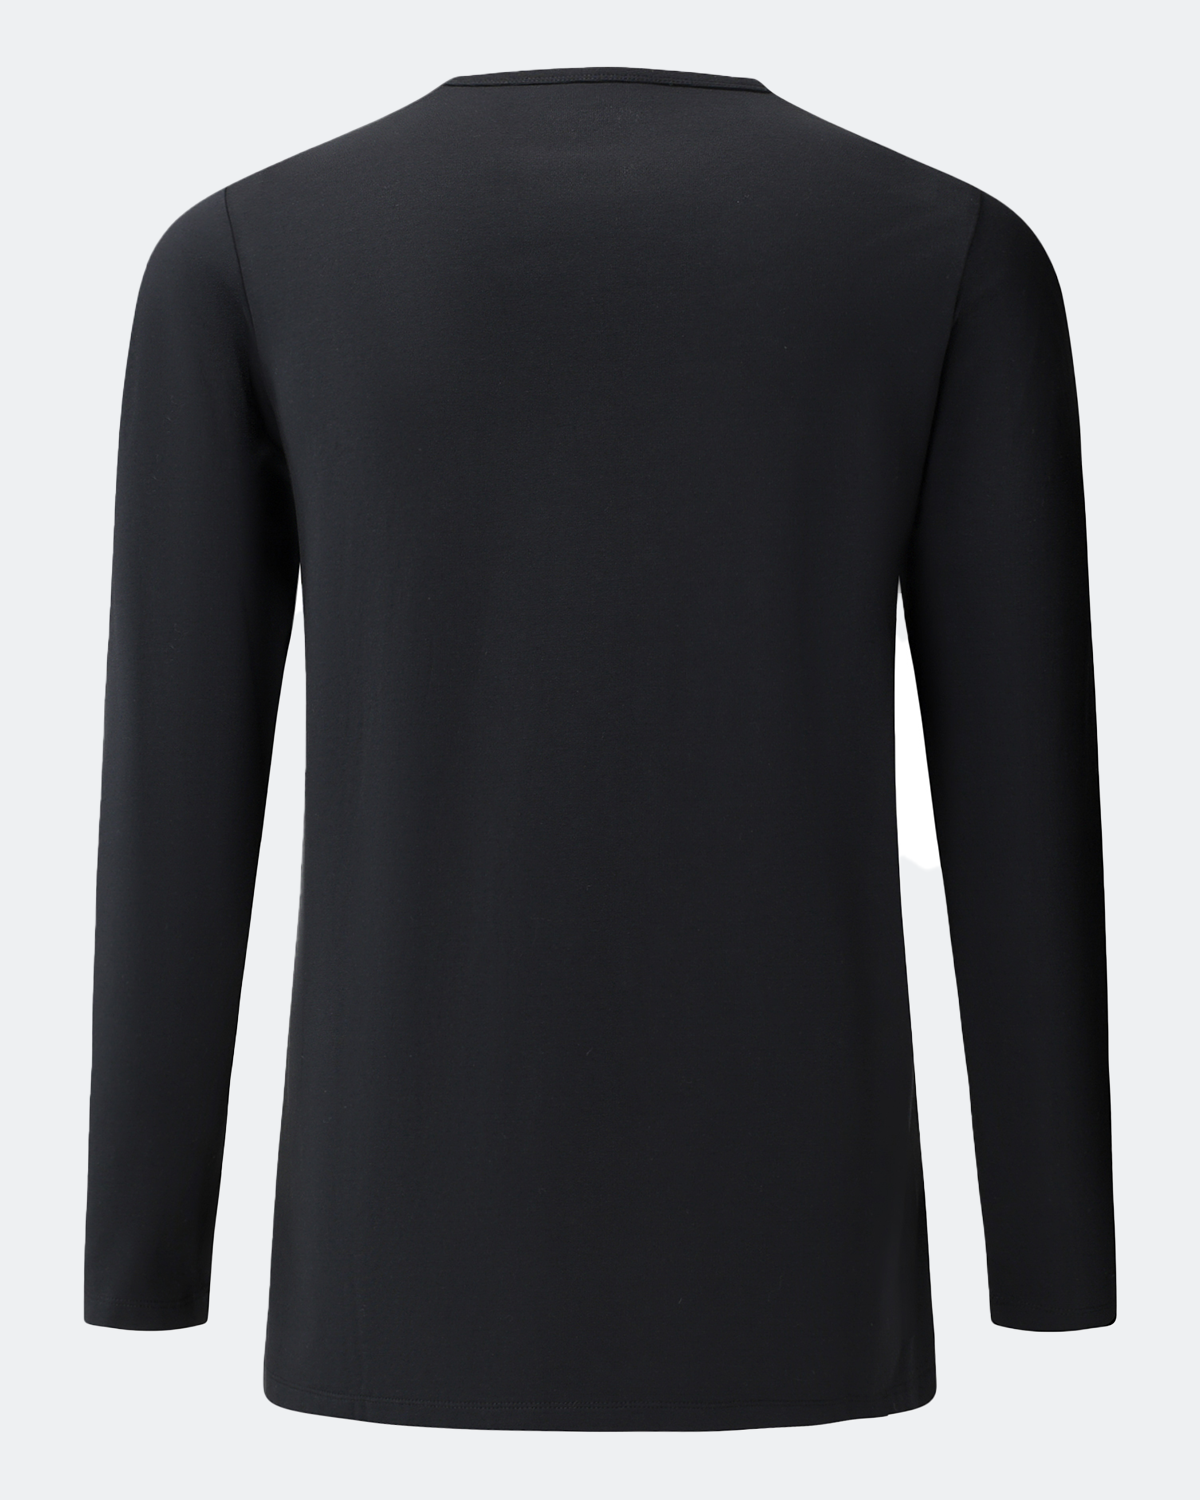 Spectacle 2.0 Black Long Sleeve